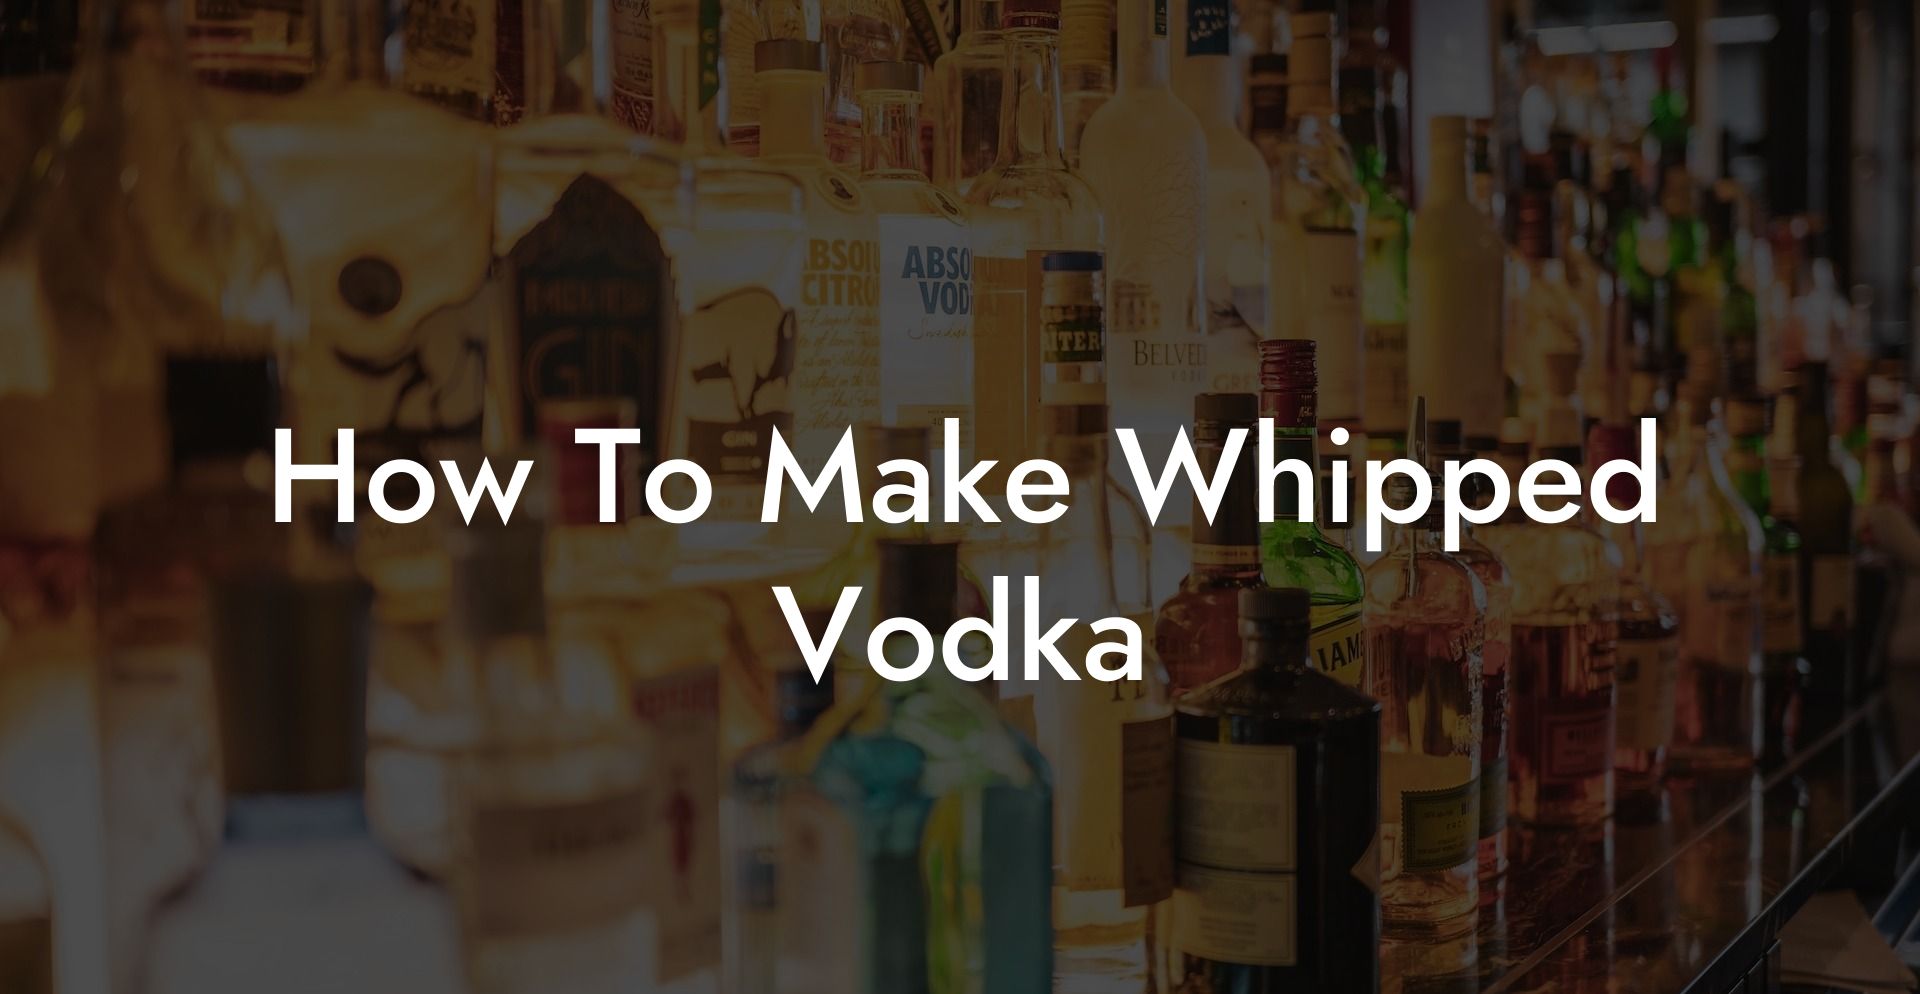 How To Make Whipped Vodka